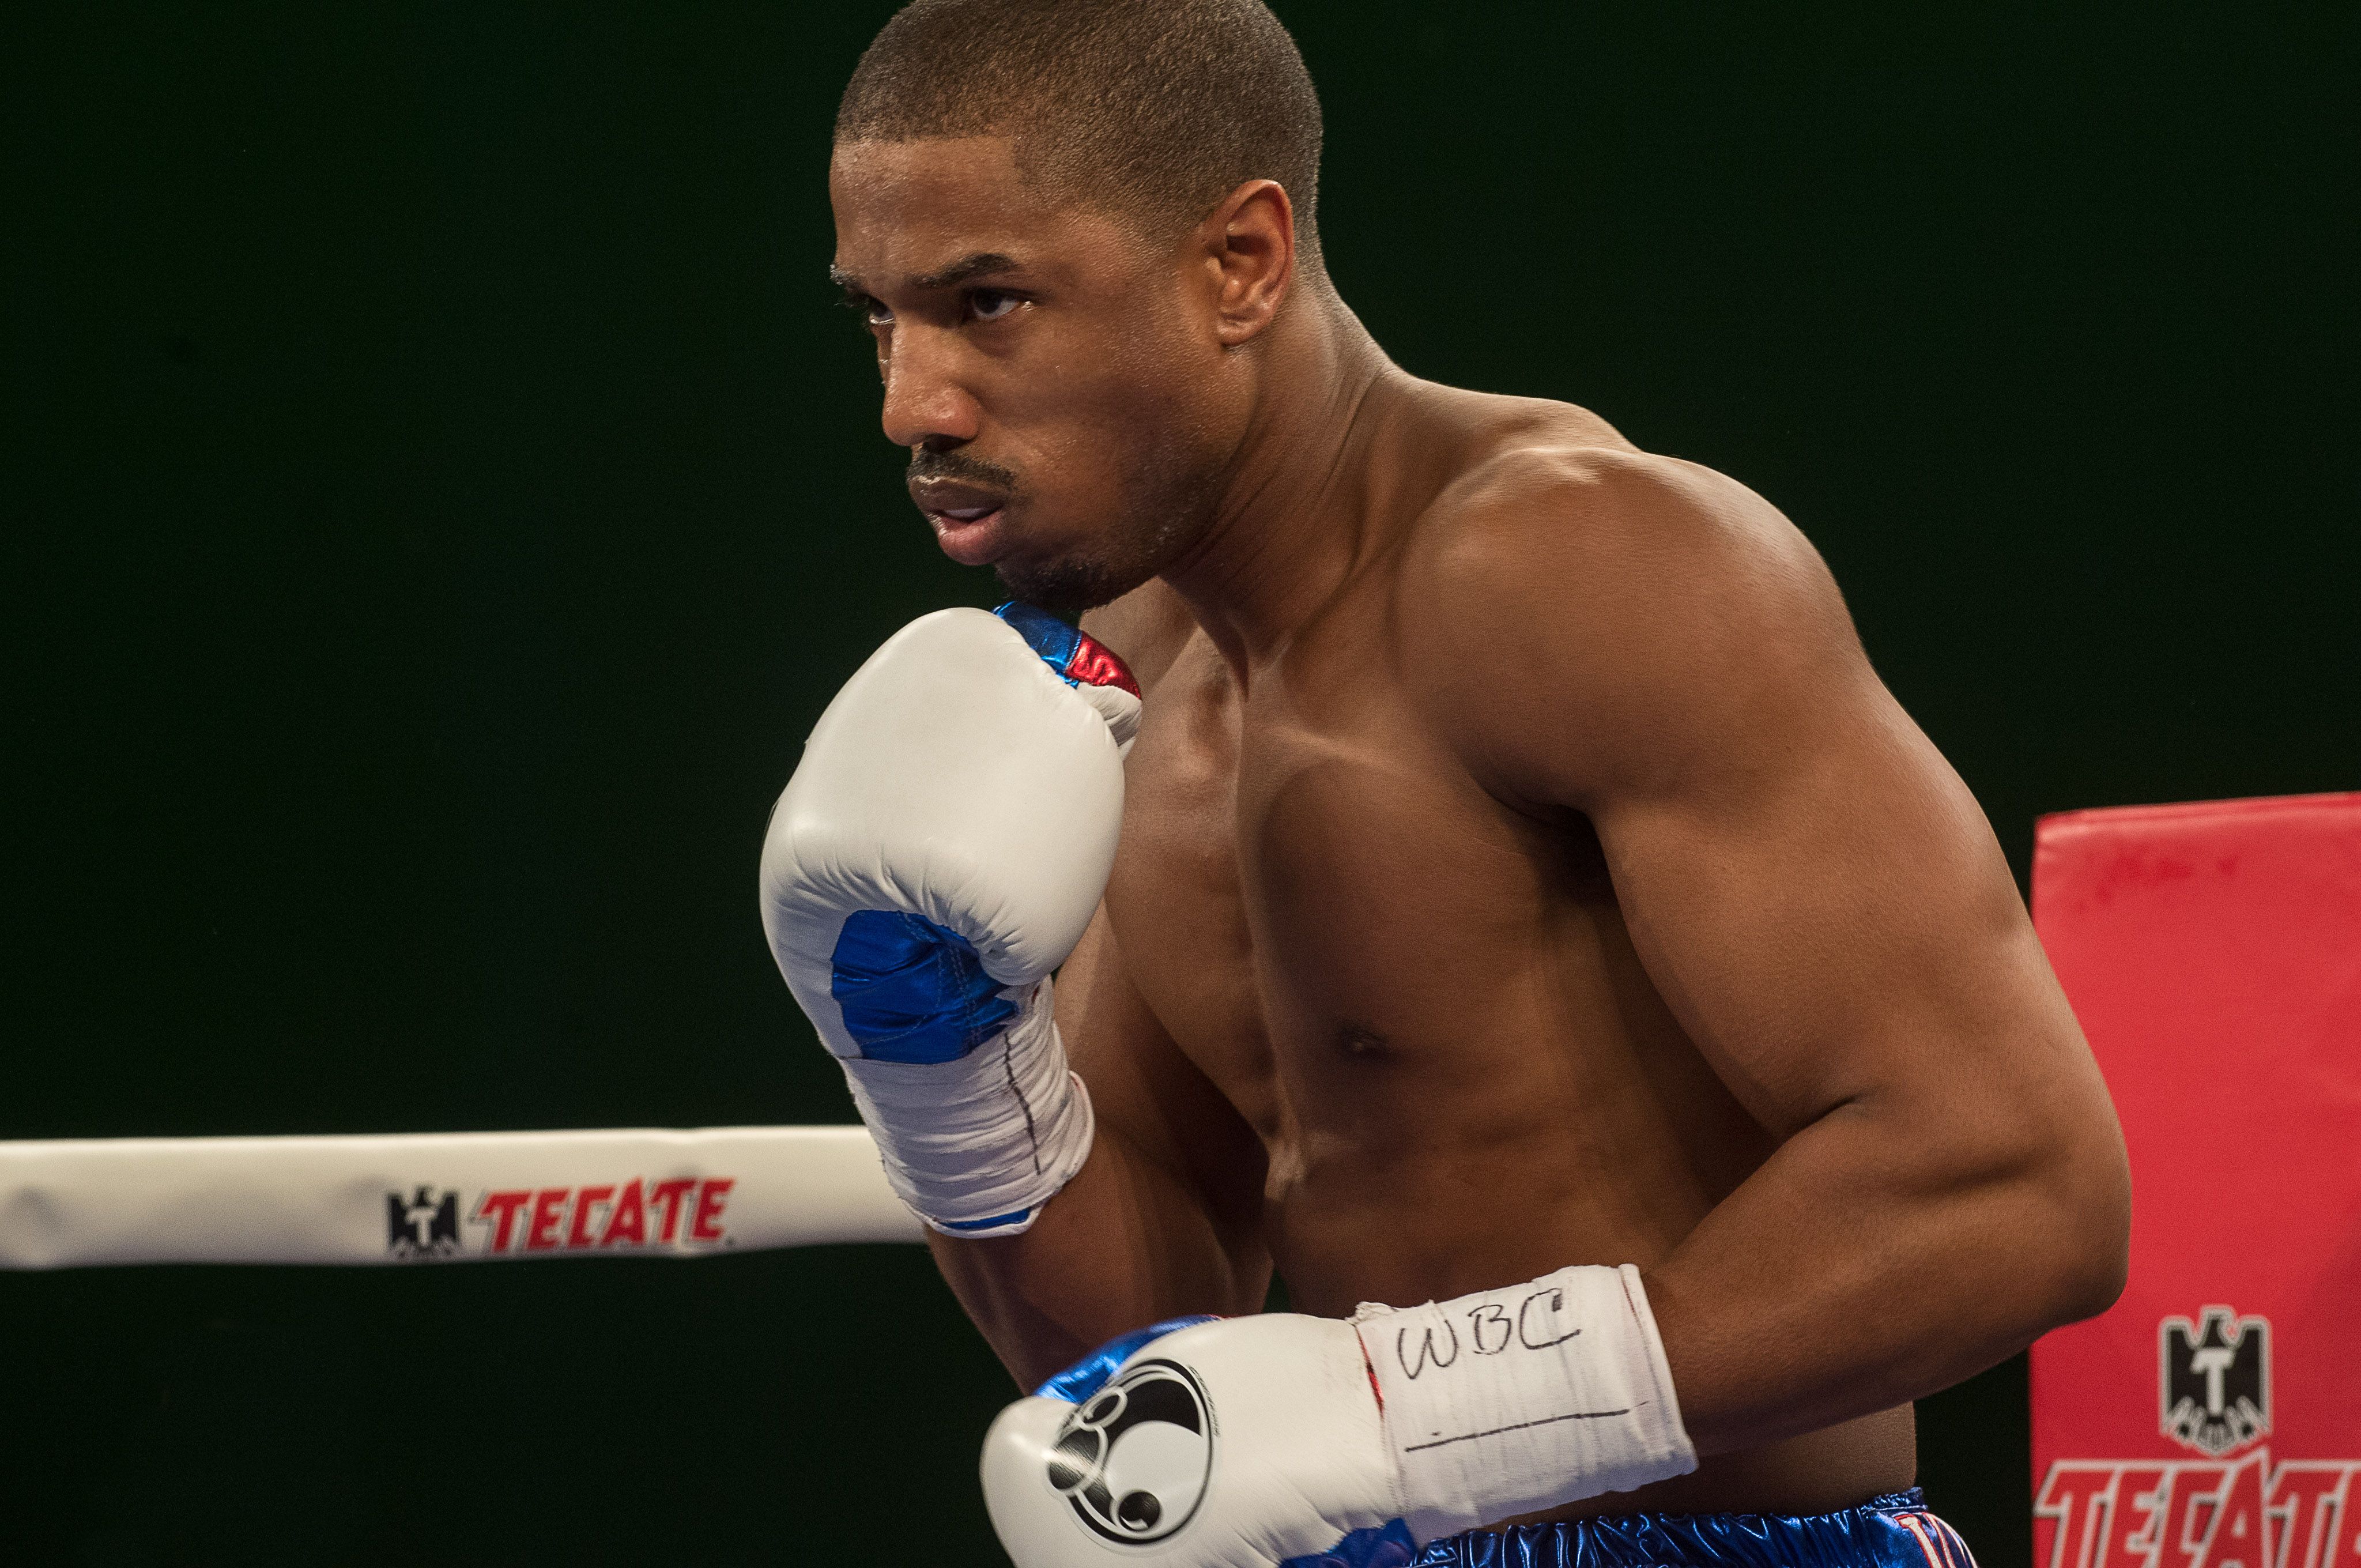 How “Creed” star Michael B. Jordan achieved his fighting form